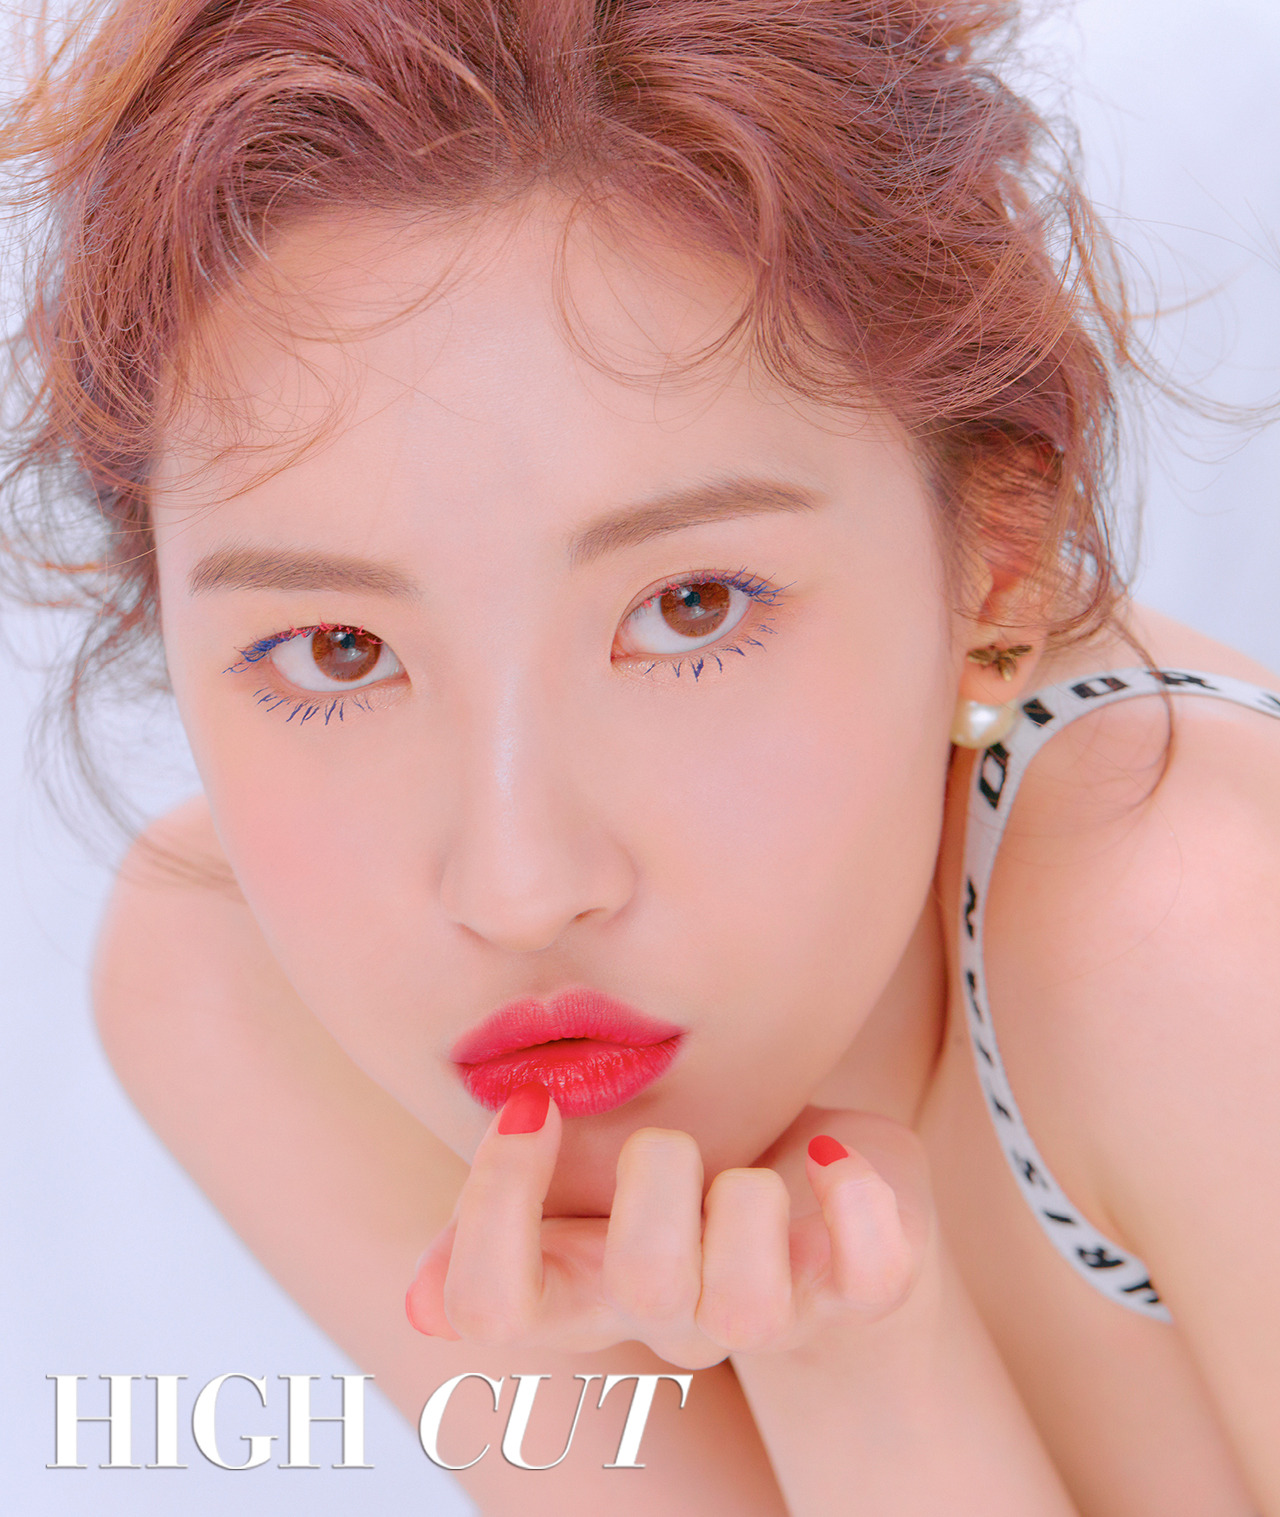 Sunmi showed off the charm of Beauty Queen through the star style magazine Hycutt picture published on the 7th.As proof of the title of Lipstick Wanpanmaid, Dior Beautys fresh and fascinated color Lipstick and makeup were digested.Lipstick, which has RED, orange, coral and hot pink colors that will play a powerful point in summer makeup, permeates the lips like juice.In particular, the orange Lipstick showed a perfect synchro rate with Sunmi, called Human Peach, and turned on charm and beauty.As well as the Fascinational flawless skin expression, Sunmis colorful facial expressions and poses are also outstanding.In the interview, Sunmi said, I did too much body gags about JTBC4 observational entertainment Secret Sister recently started.There are few people shooting, and when I went back to the camera, I blinked. I saw all the usual behaviors at home.Even when I tried to take off my clothes, I laughed, Aaa camera! And even when I was going to the bathroom, Aaa camera!Secret sister also revealed her impressions with Red Velvet Seulgi, who said: I originally liked Red Velvet so much.At the end of the main character activity, Red Velvet came back to Bad Boy and had many opportunities to see the stage, among which Seulgi was very prominent.Its so cool and chic, the power from the big keys and the ghetto.Sunmi, who has been truly free on stage since Innocent Thing, said, Even though I had a solo album and Wonder Girls, I had not found my identity until then.I had a lot of time to come out of JYP and think about me, but then I started to virtue about people.I was stuck in the middle of my investigation because I thought, I do not want people to hate it, I do not want to say anything.There are people who hate Michael Jackson, Prince, and Beyonce... Before returning to Innocent Thing, I got an enlightenment.It seems to be reflected in the music video and delivered to people through the stage. Sunmis interviews with the pictures can be found in Hycutt 223, published on June 7.